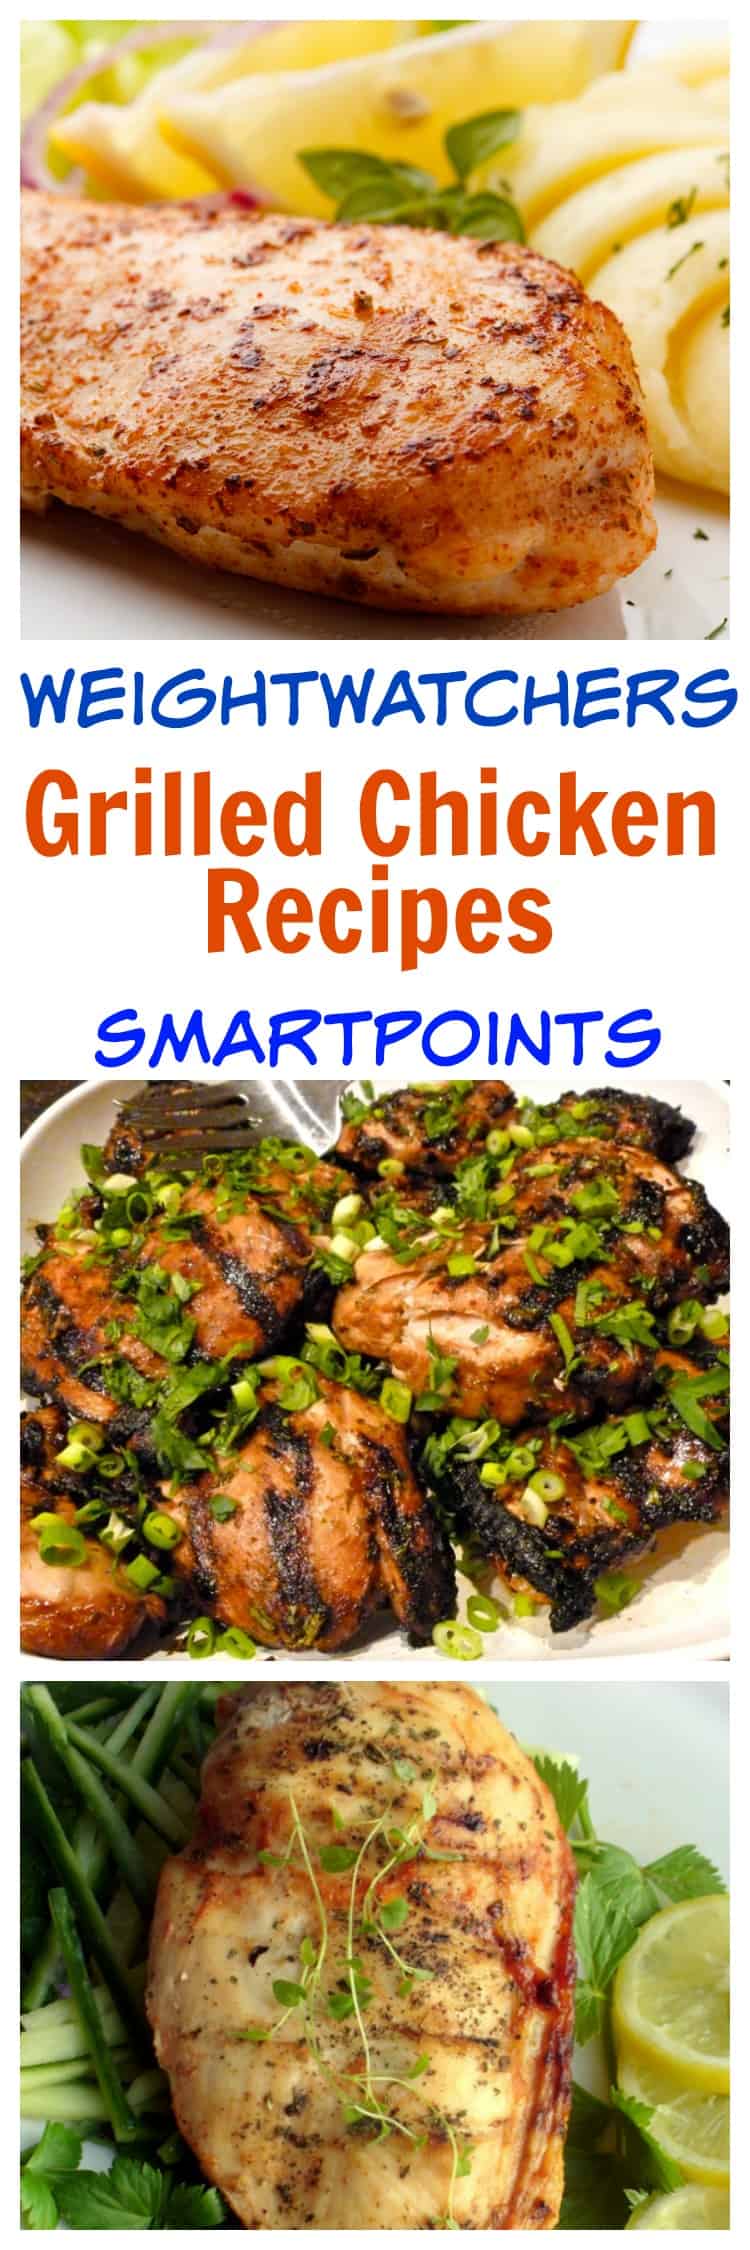 WW Grilled Chicken Recipes with SmartPoints Pin close up of chicken and text